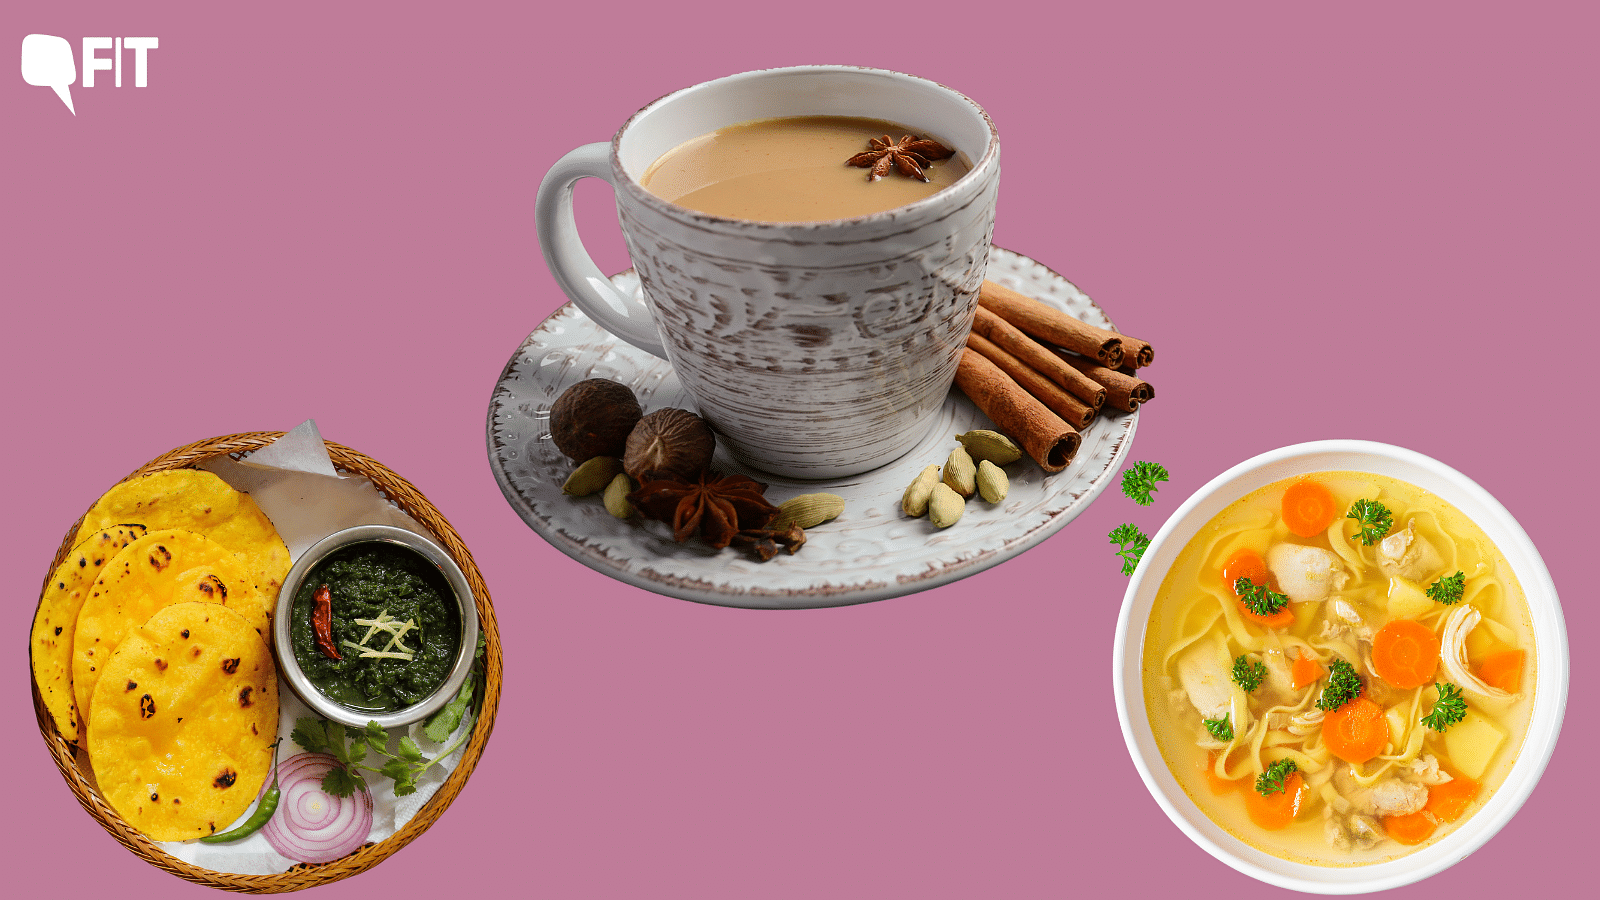 Saag, Mushroom & Soups: Must Eat Foods During Harsh Winter That Keep You Warm - The Quint FIT